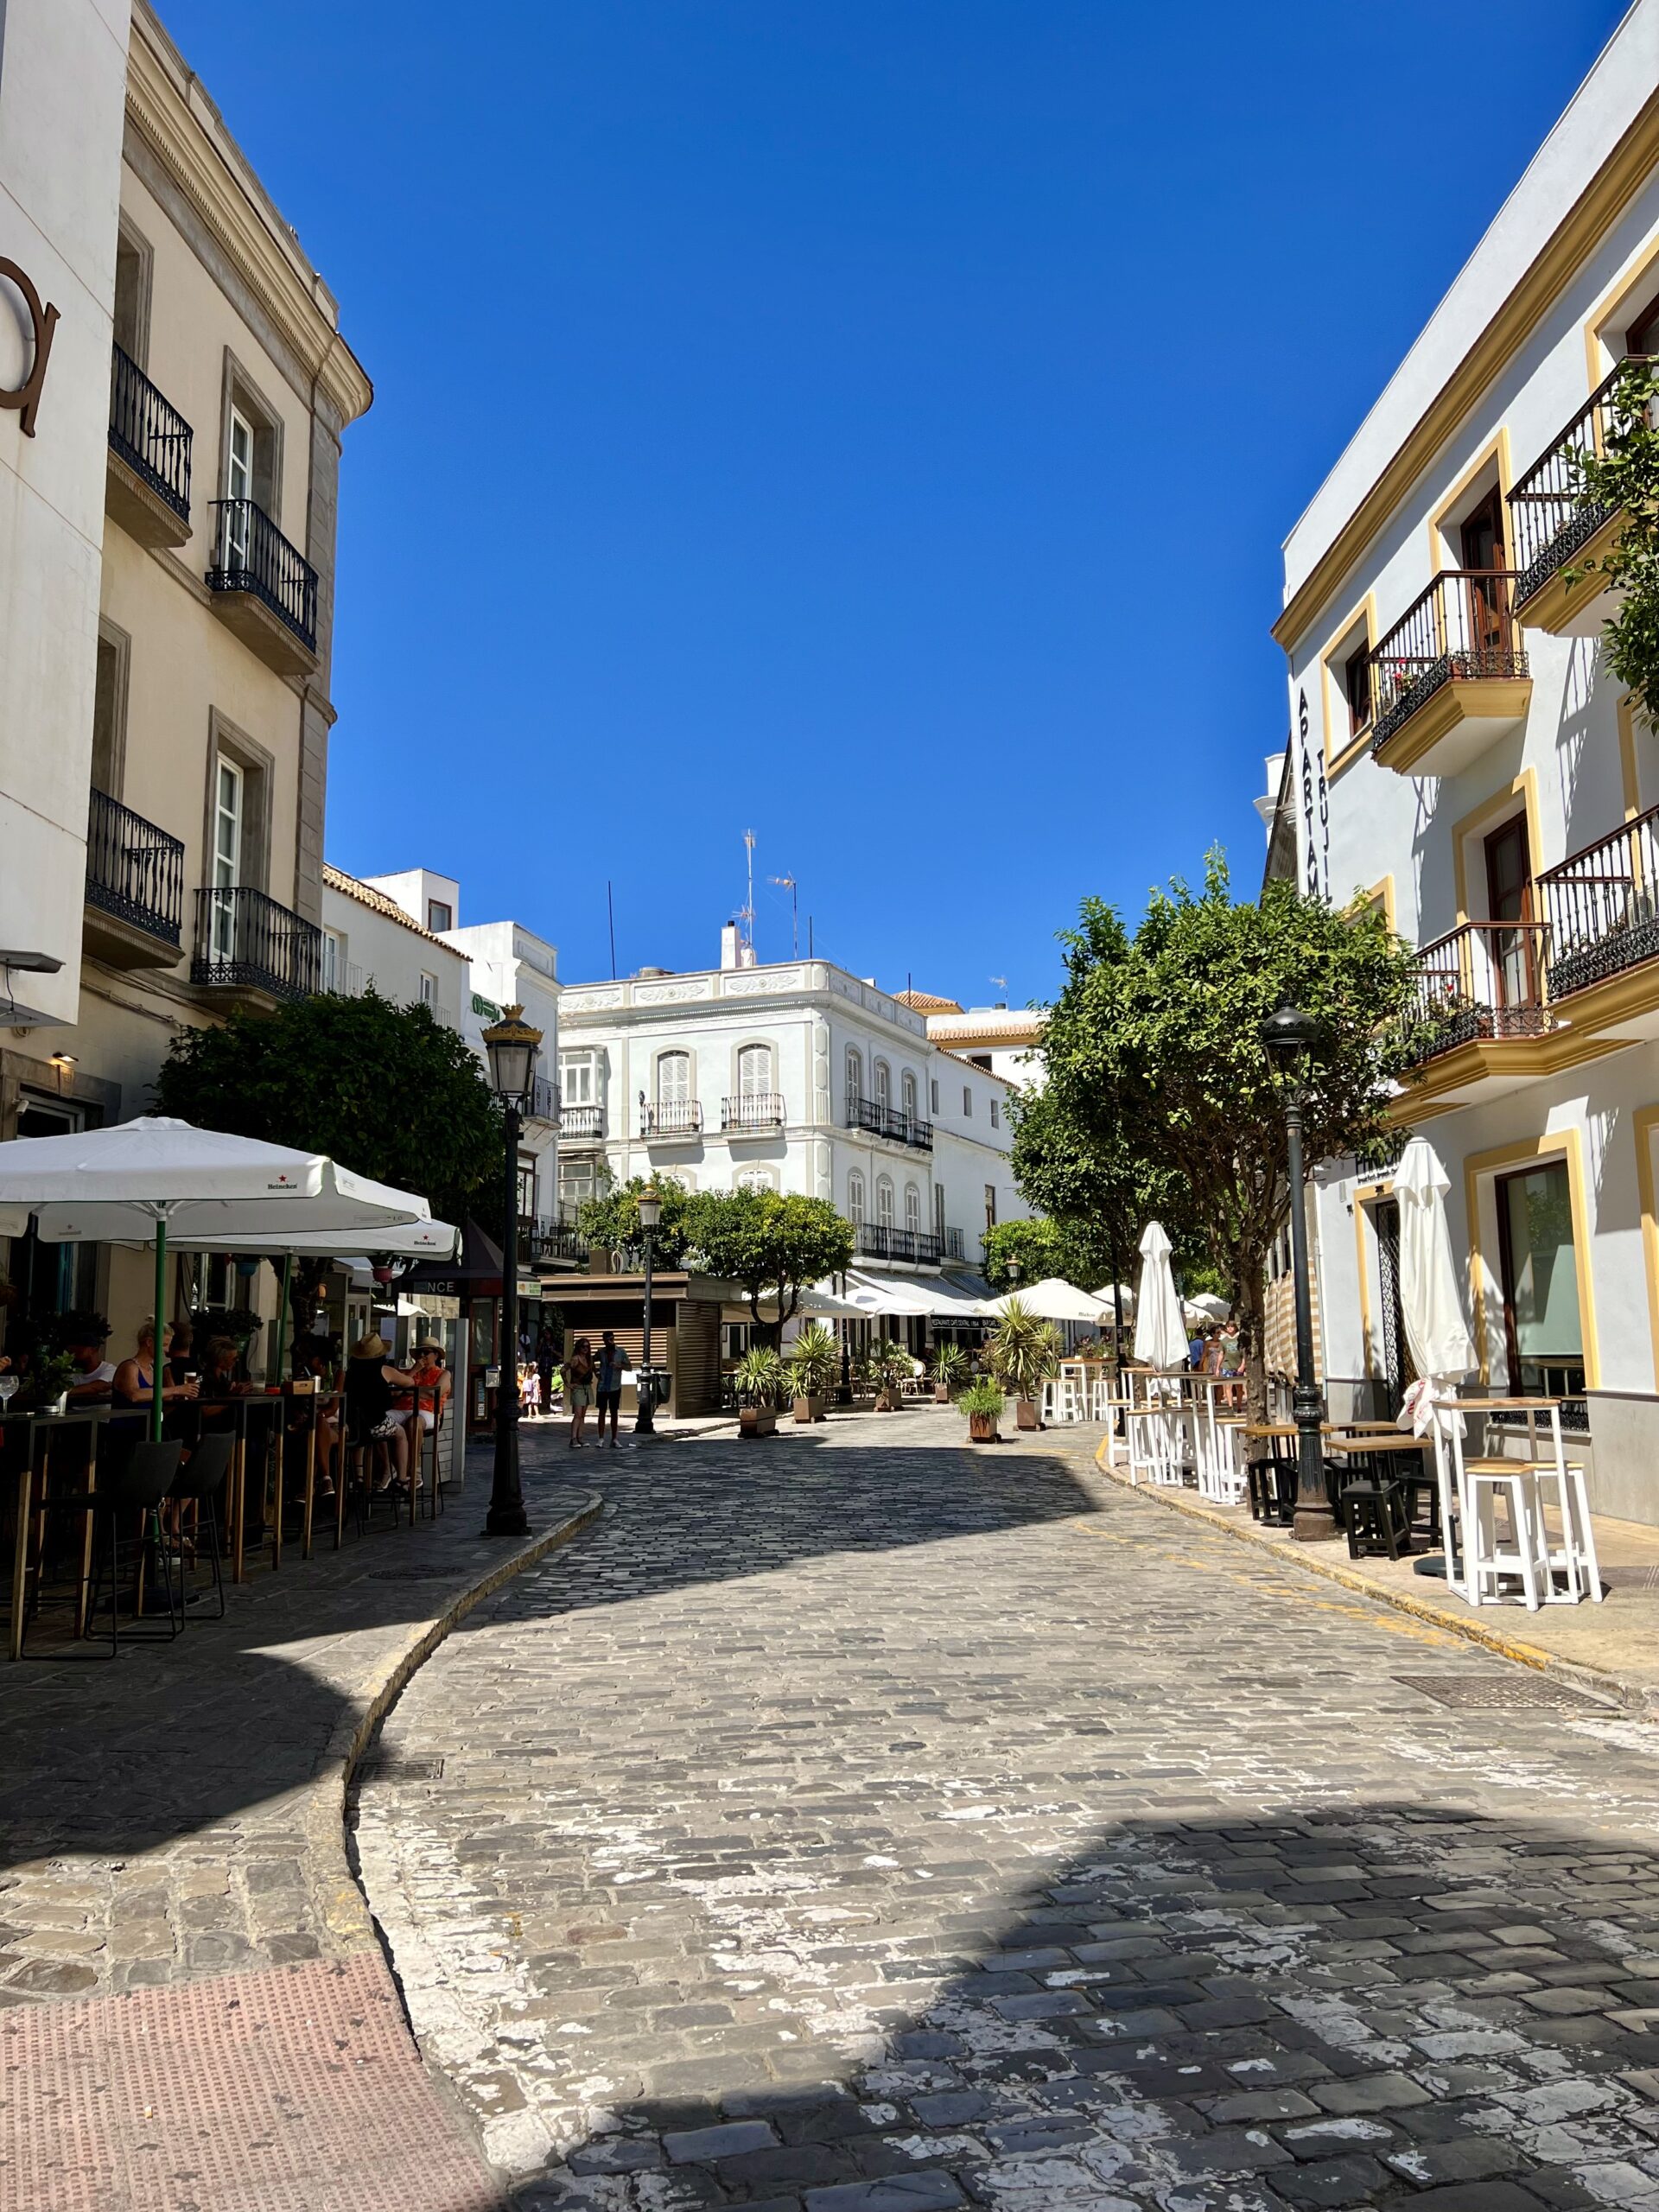 a photo of white and cream colored Mediterranean style buildings and a cobblestone street. the buildings have the classic european look with wrought-iron balconies, window boxes, and plants. A few trees that look like olive trees line the street.